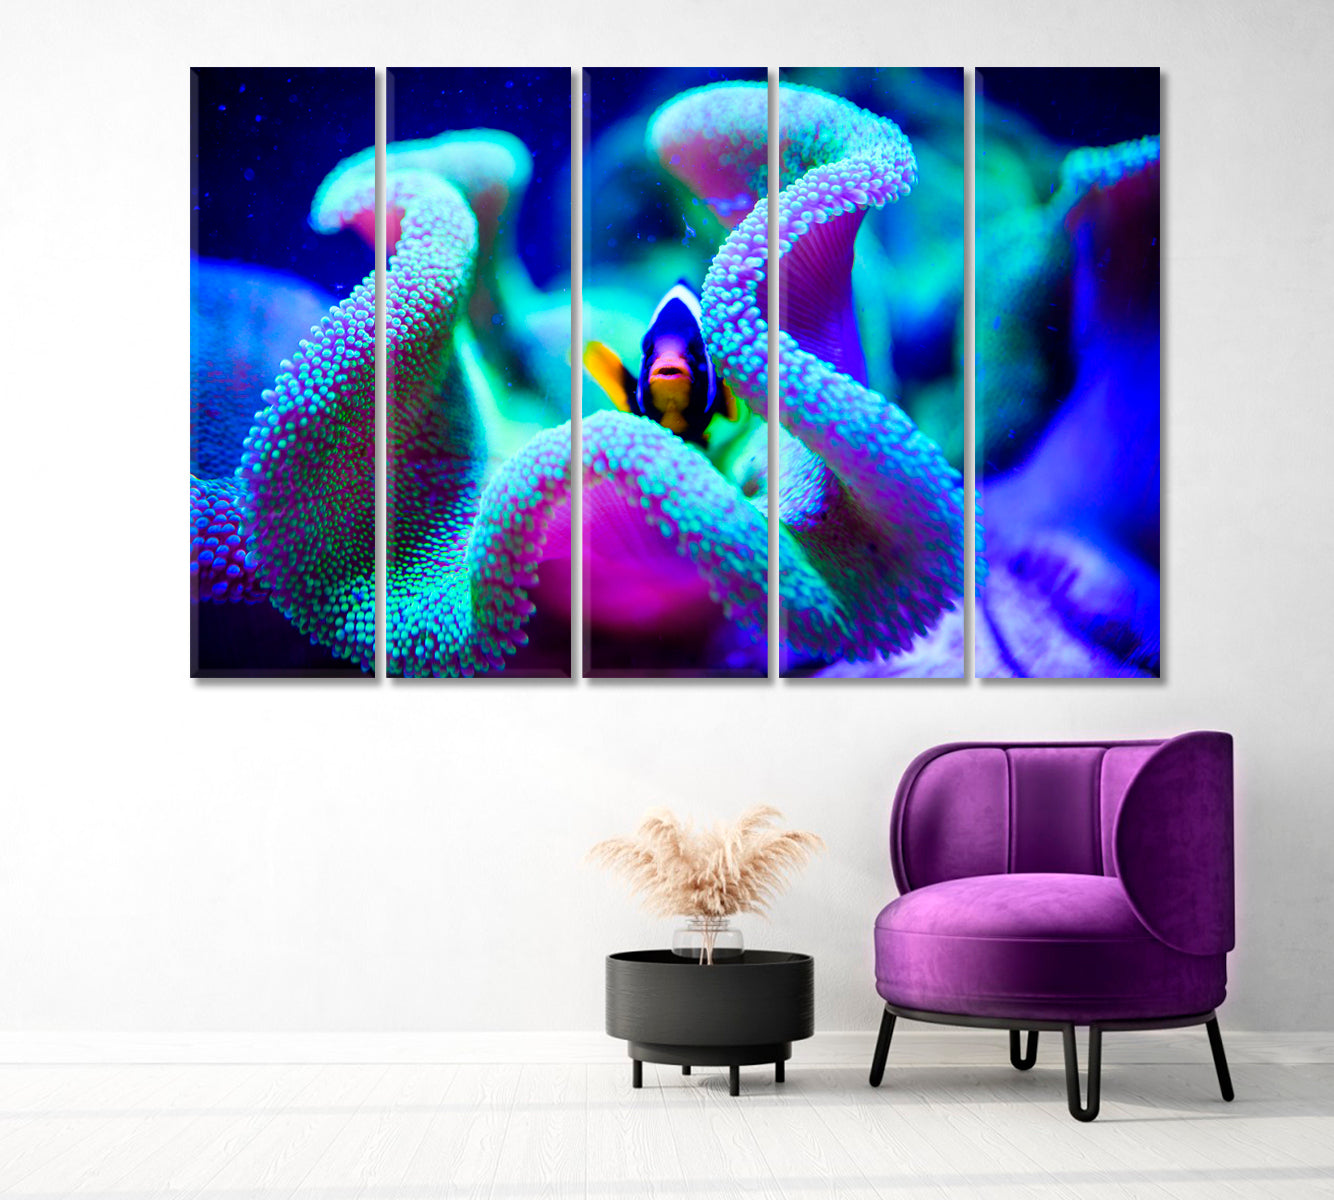 Wonderful Underwater World with Corals and Tropical Fish Canvas Print-Canvas Print-CetArt-1 Panel-24x16 inches-CetArt